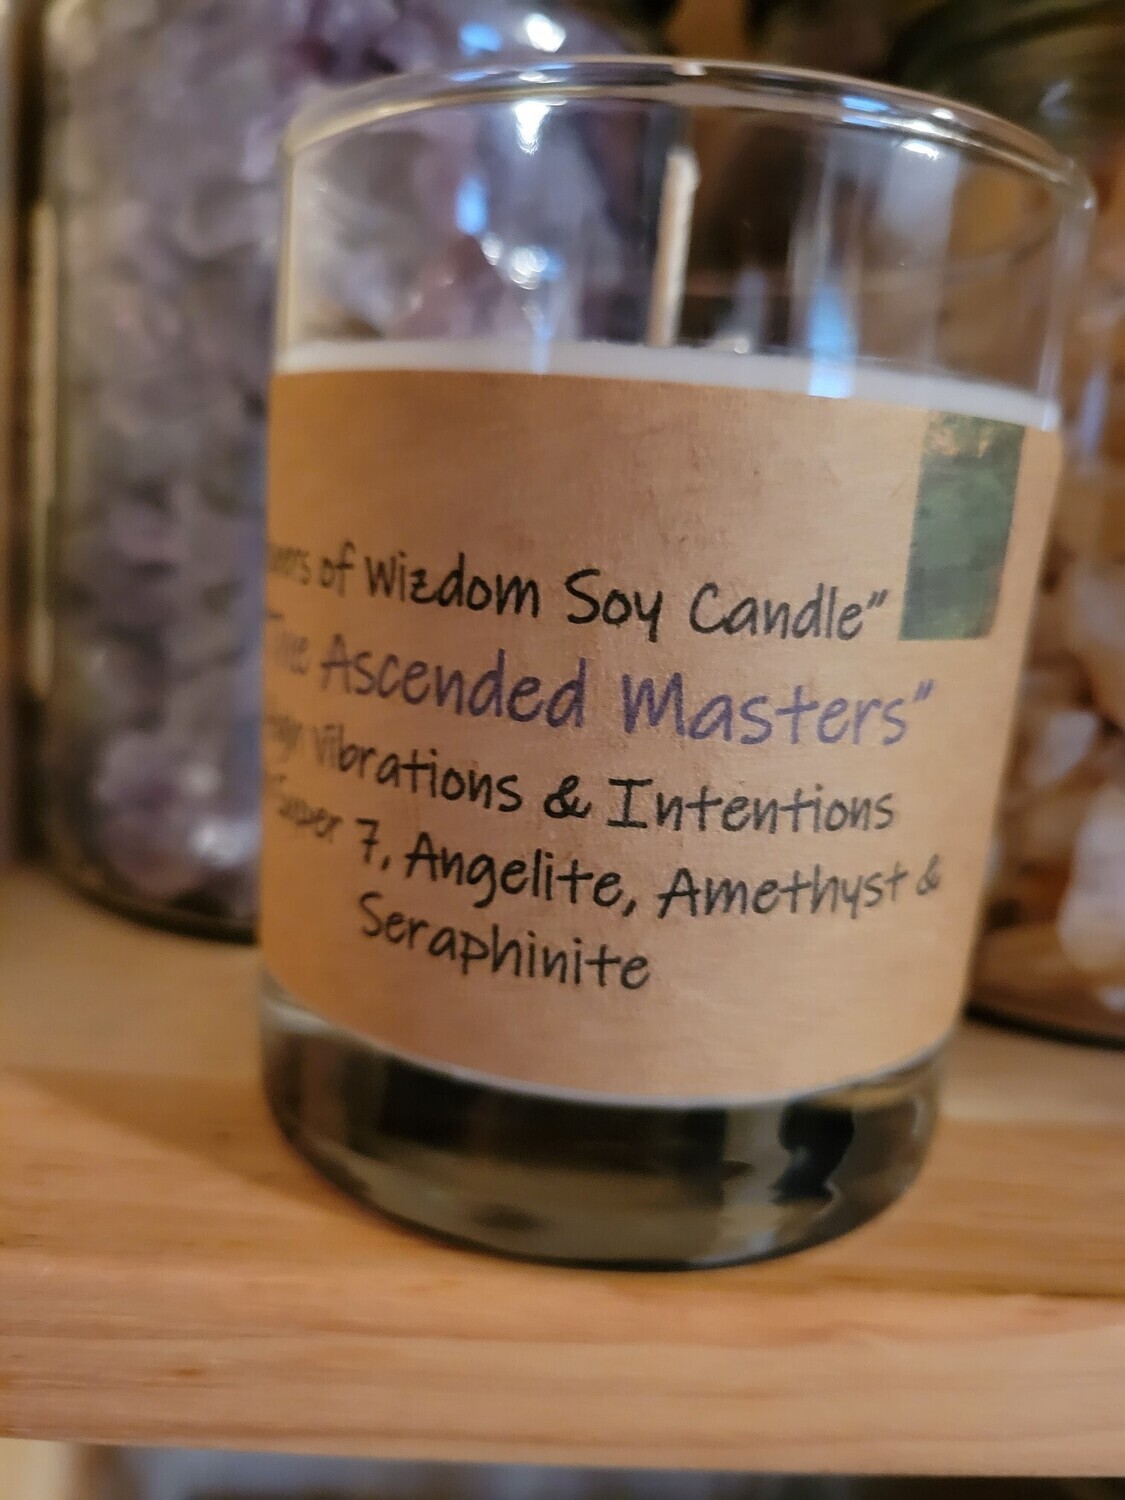 Judy's Soy Candle -The Ascended Masters